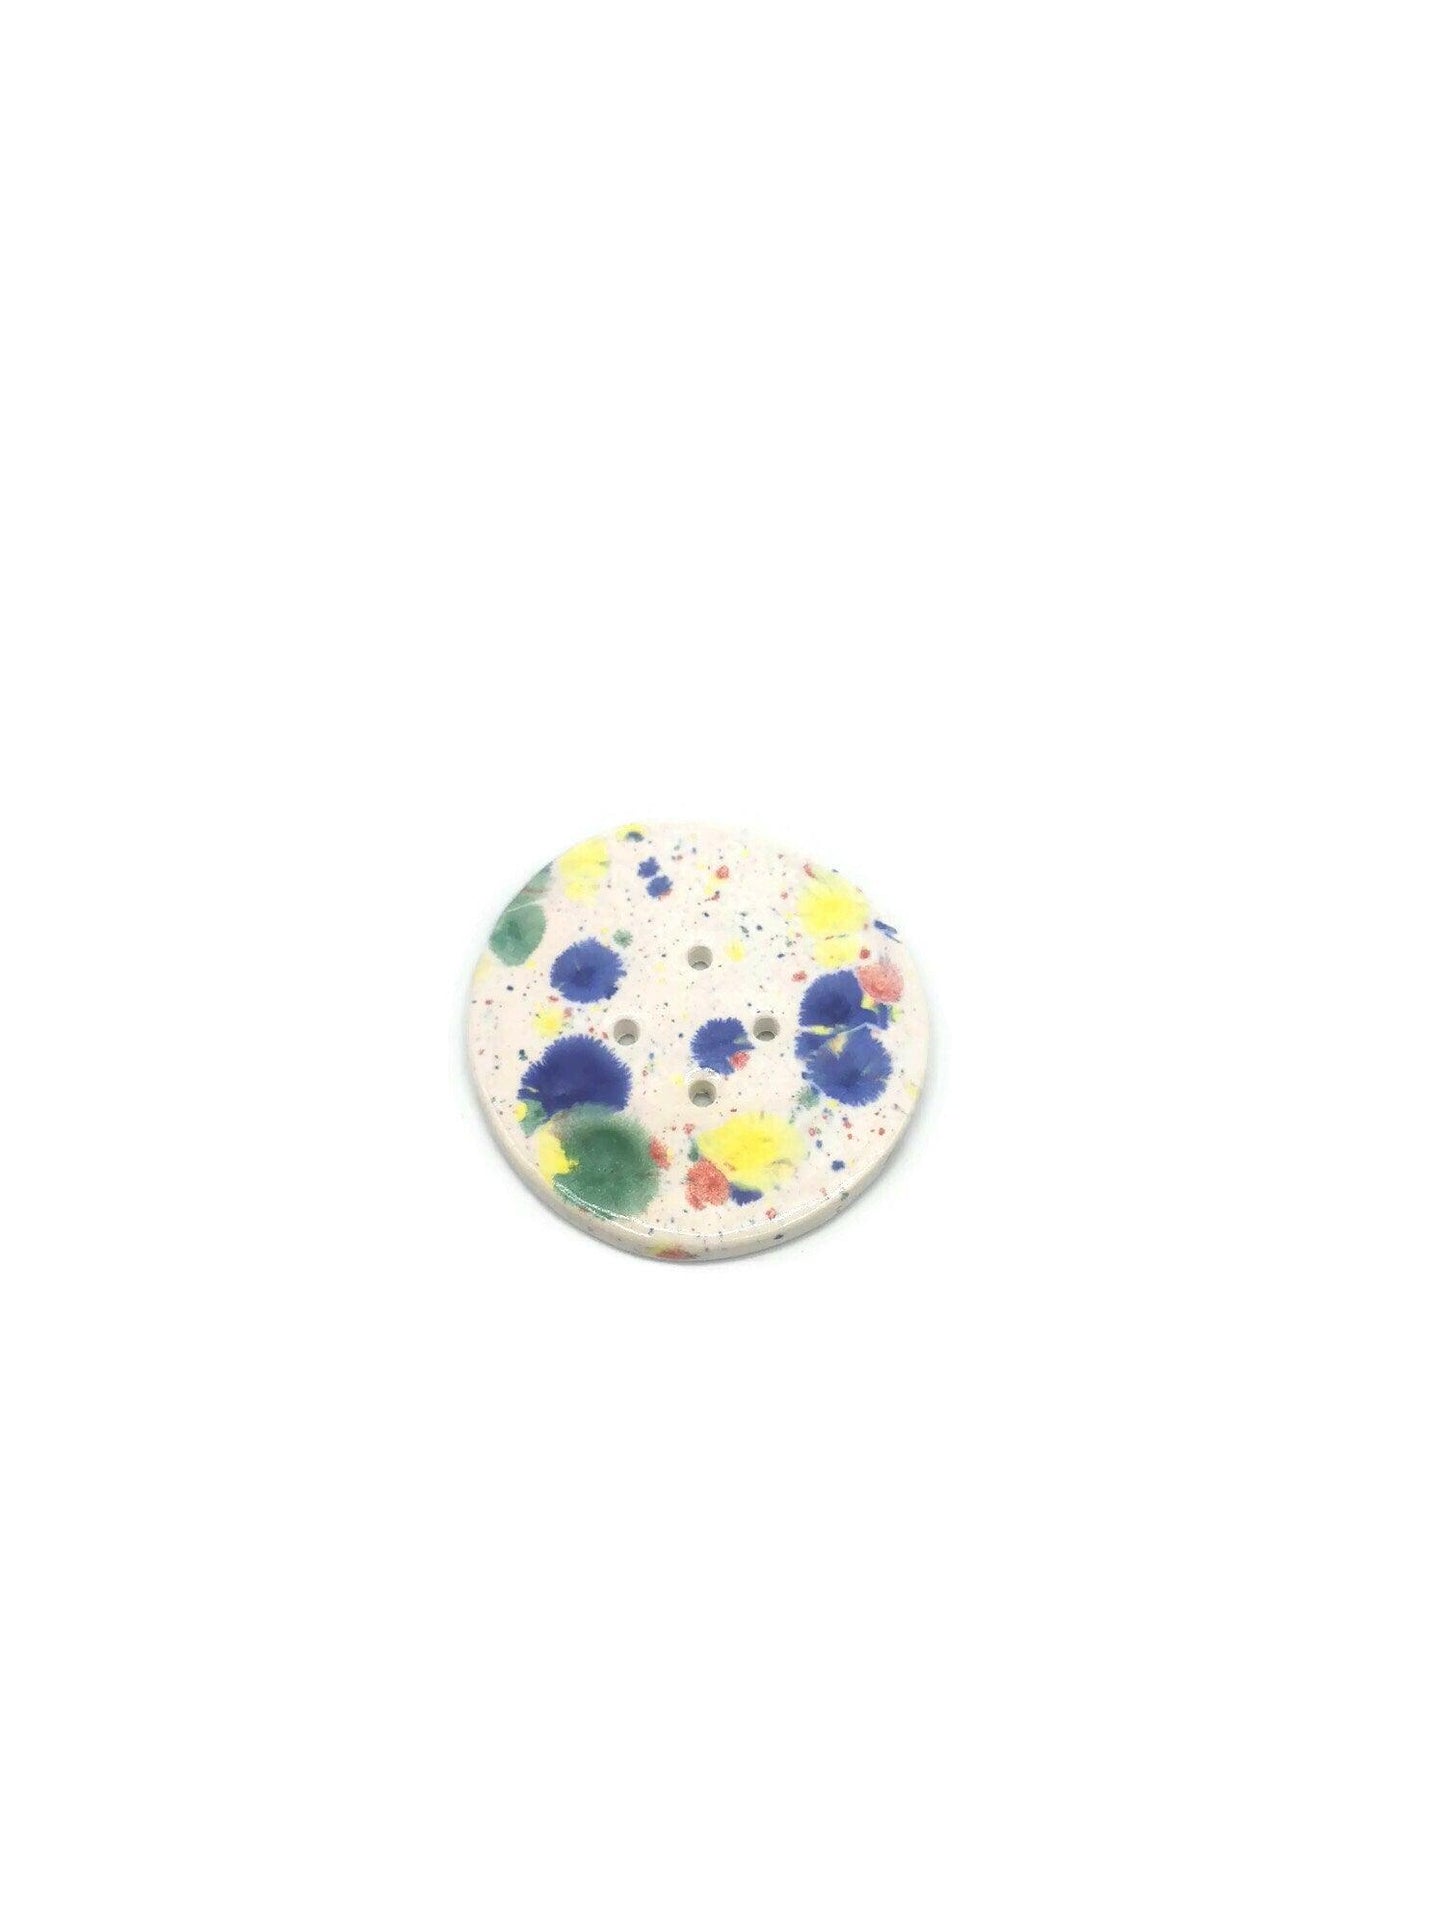 1Pc 65mm Colorful Giant Sewing Buttons, Jumbo Confetti Decorative Novelty Extra Large Buttons for Crafts, Handmade Ceramic Coat Button - Ceramica Ana Rafael